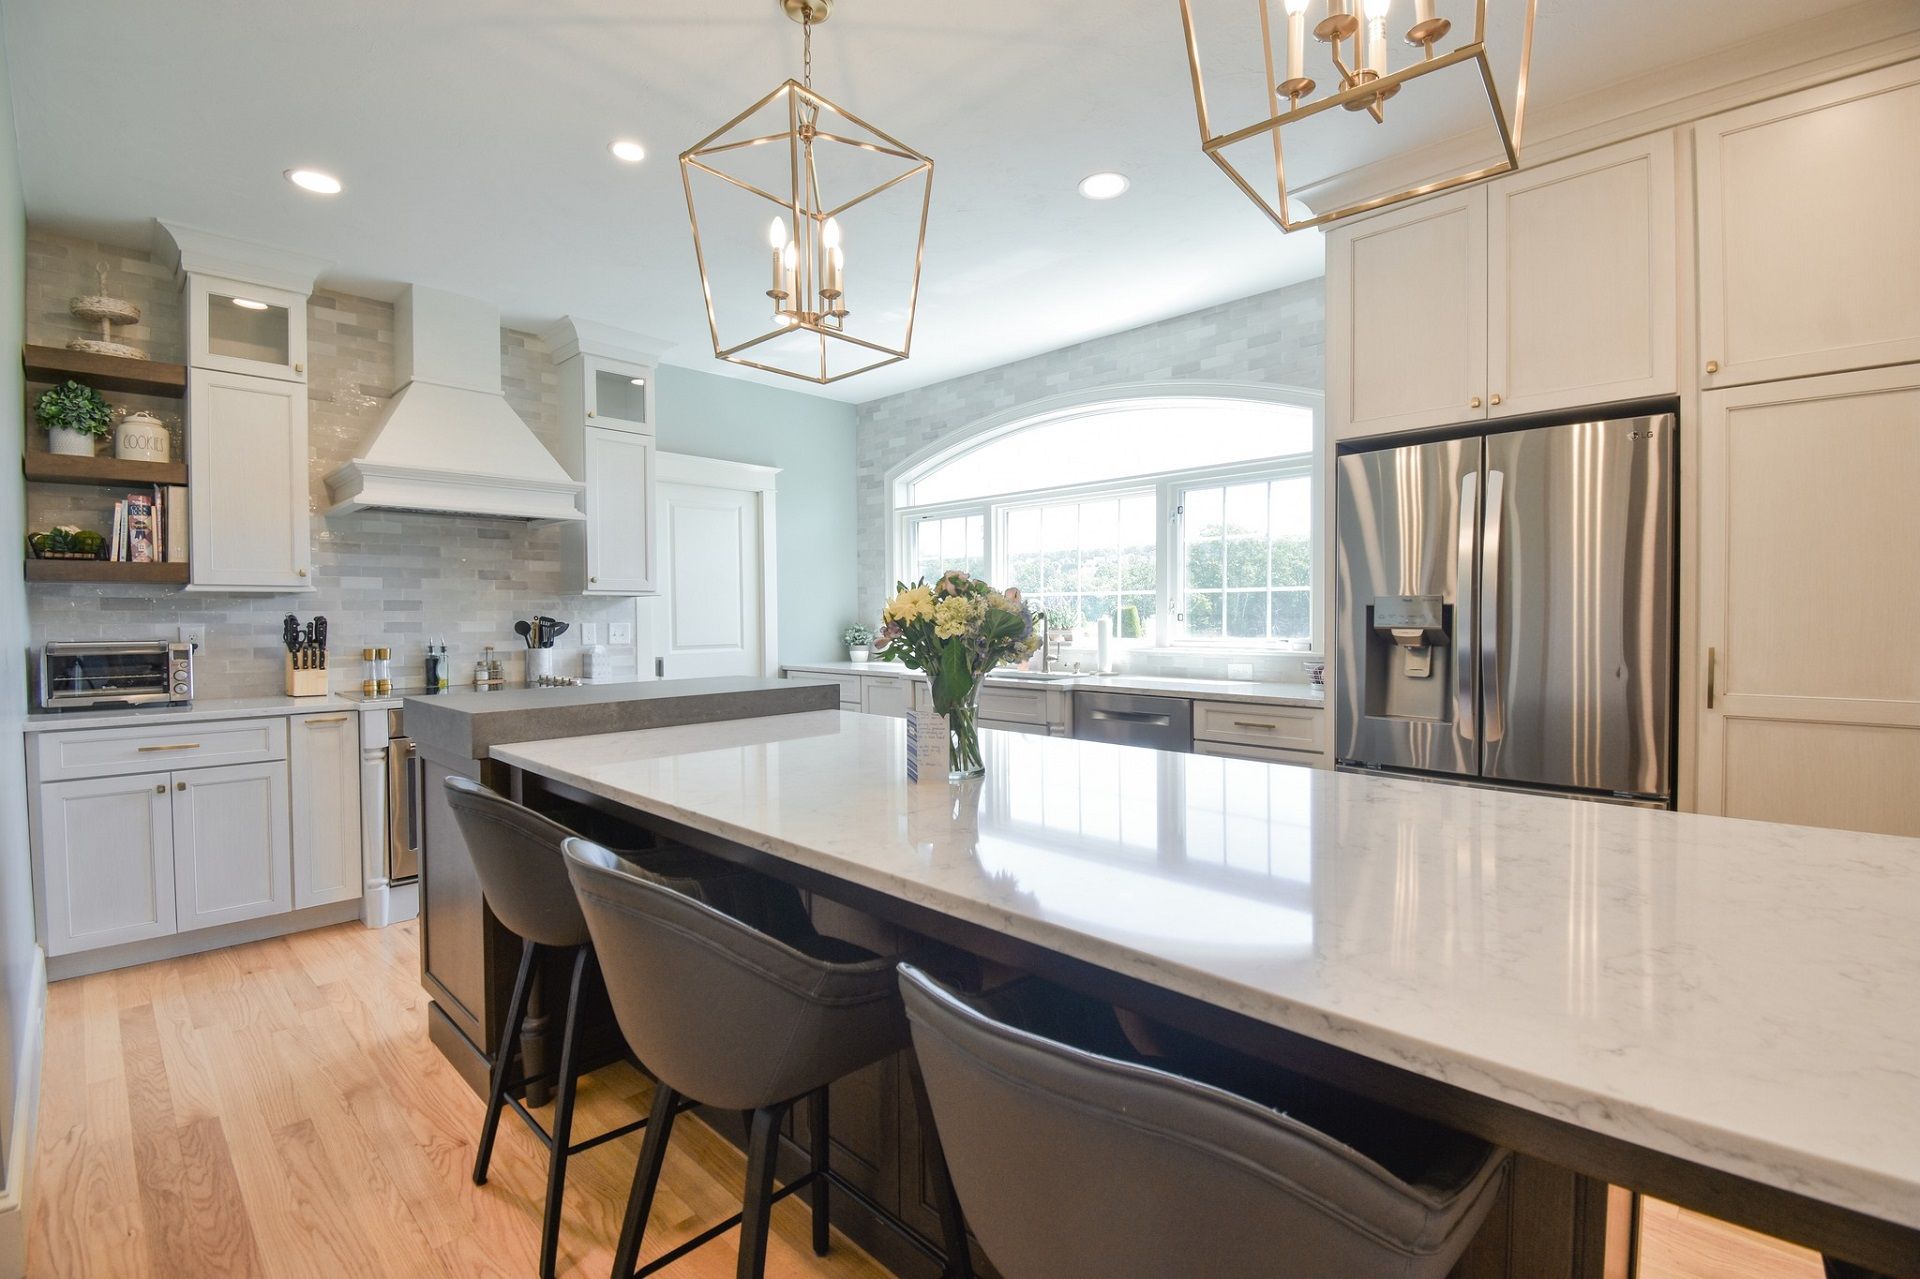 Recent Project Gallery | Mid-State Kitchens